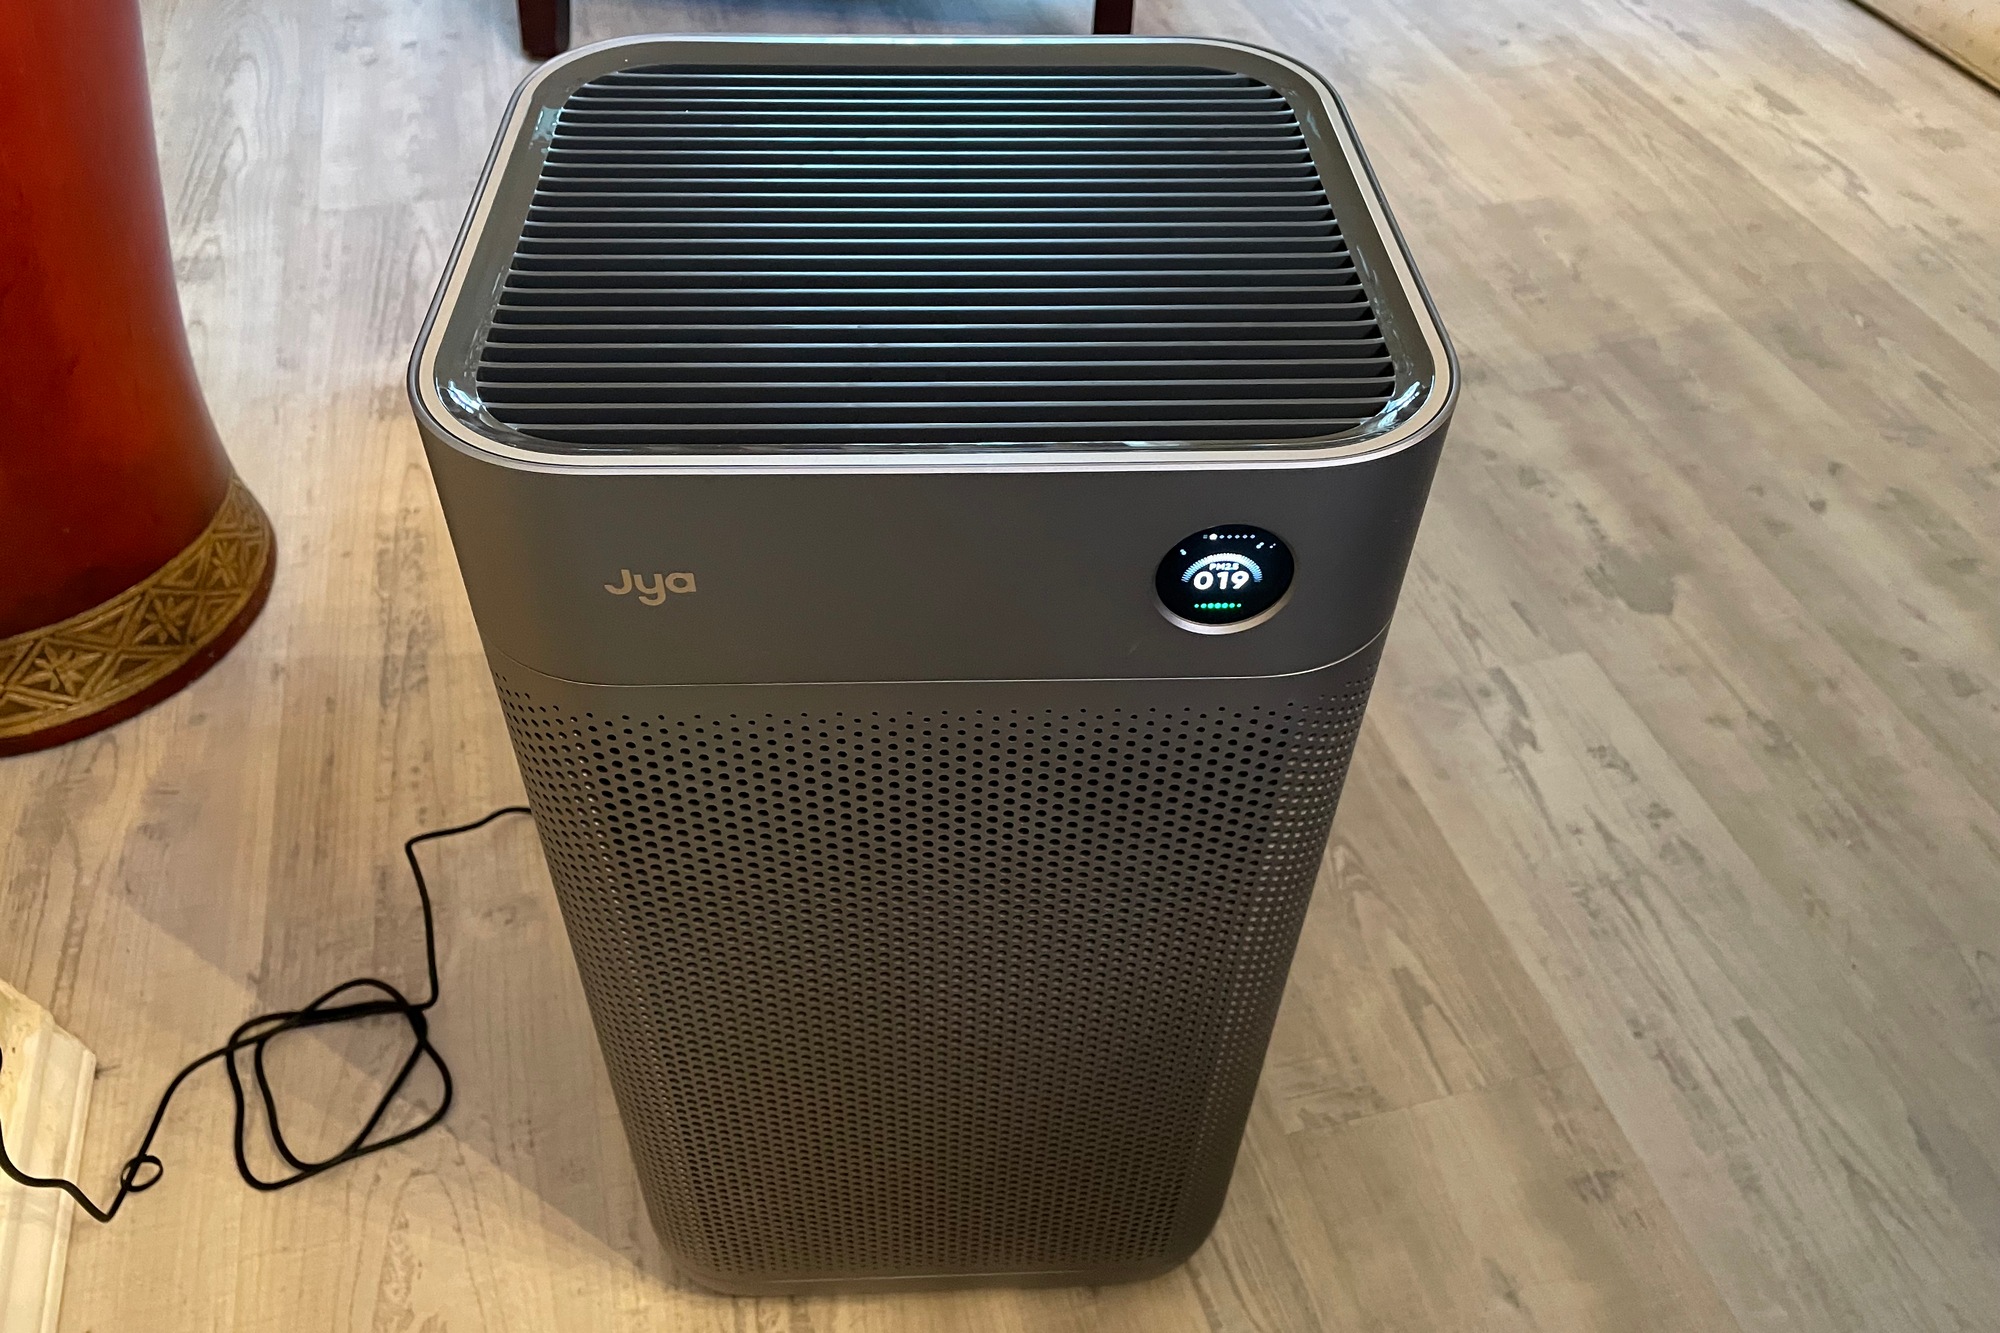 Jya Fjord air purifier -- Best for mid-sized rooms 